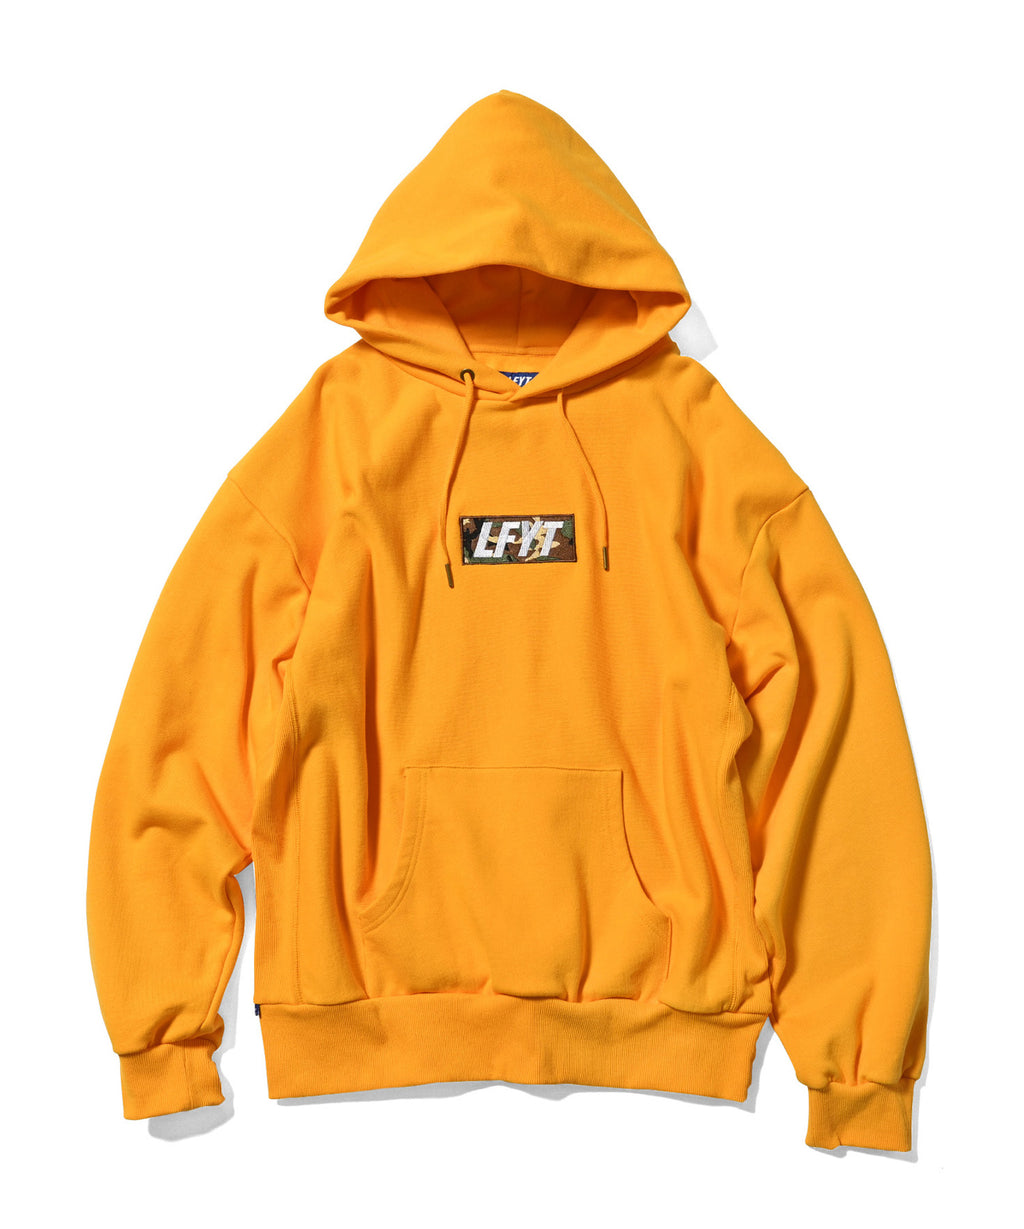 SWEATSHIRT online shopping | LFYT OFFICIAL SITE – Page 2